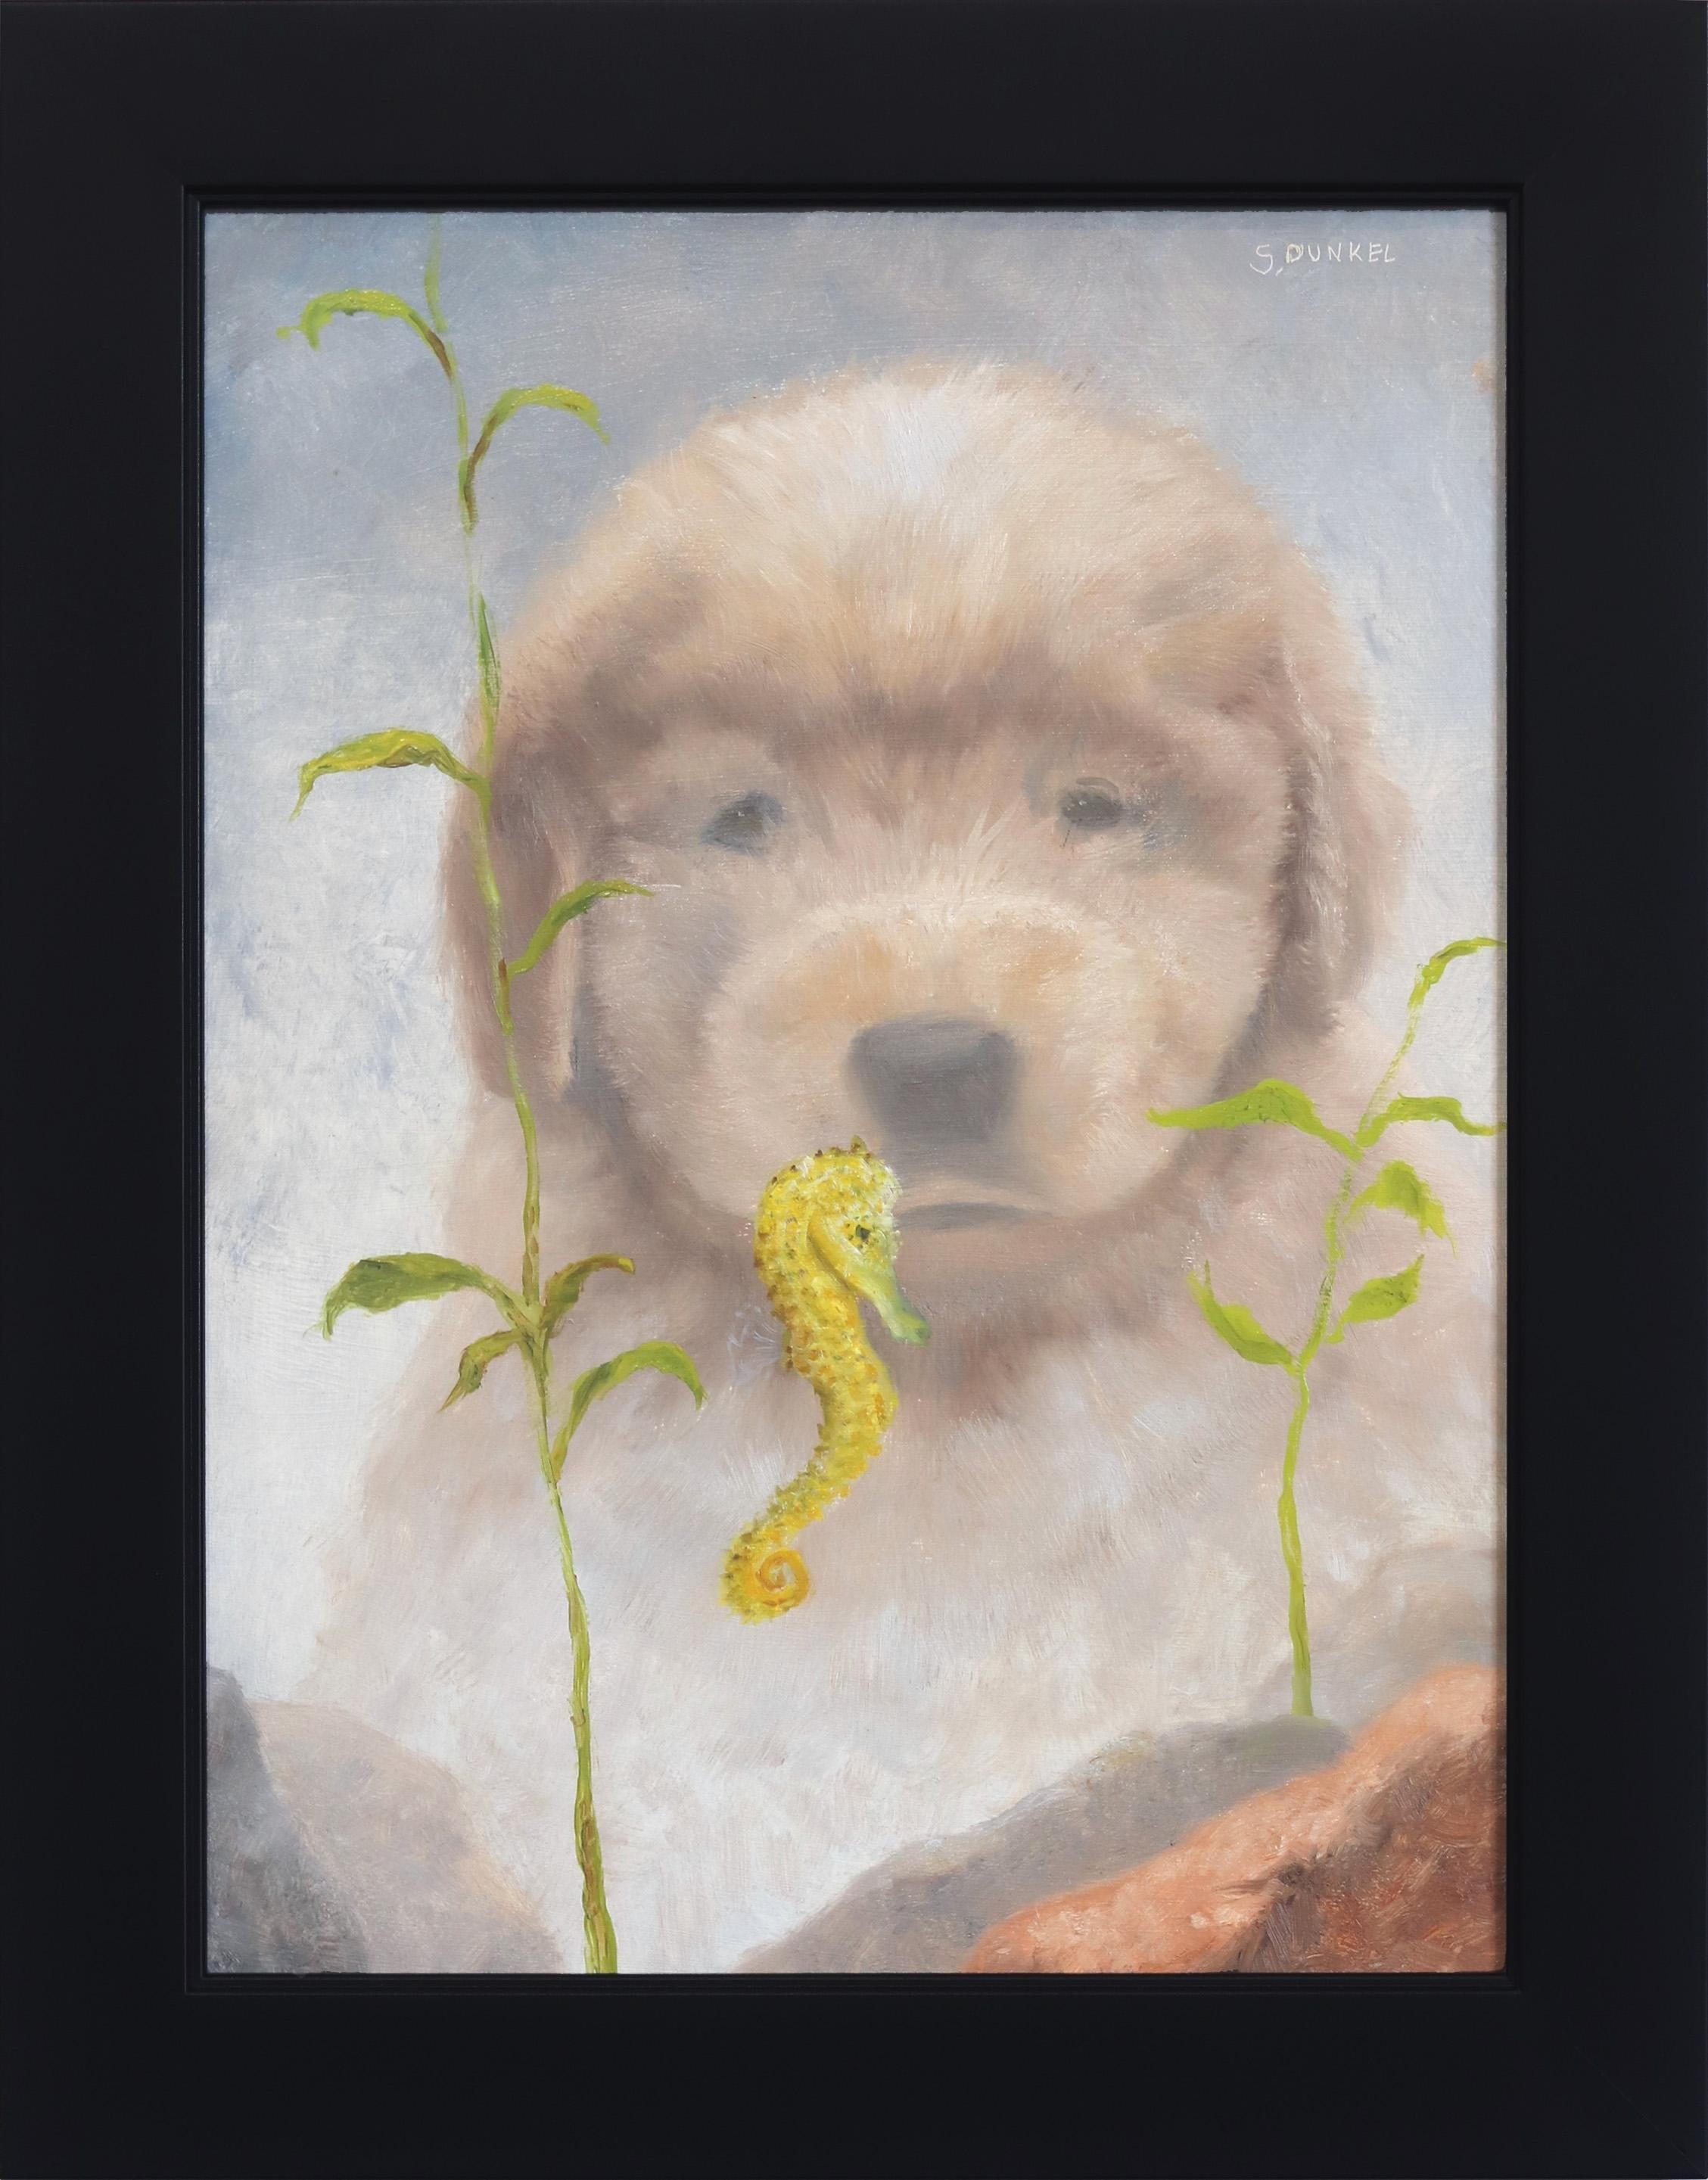 Seahorse and Puppy - Framed Animal Painting Dog Looking Through Aquarium